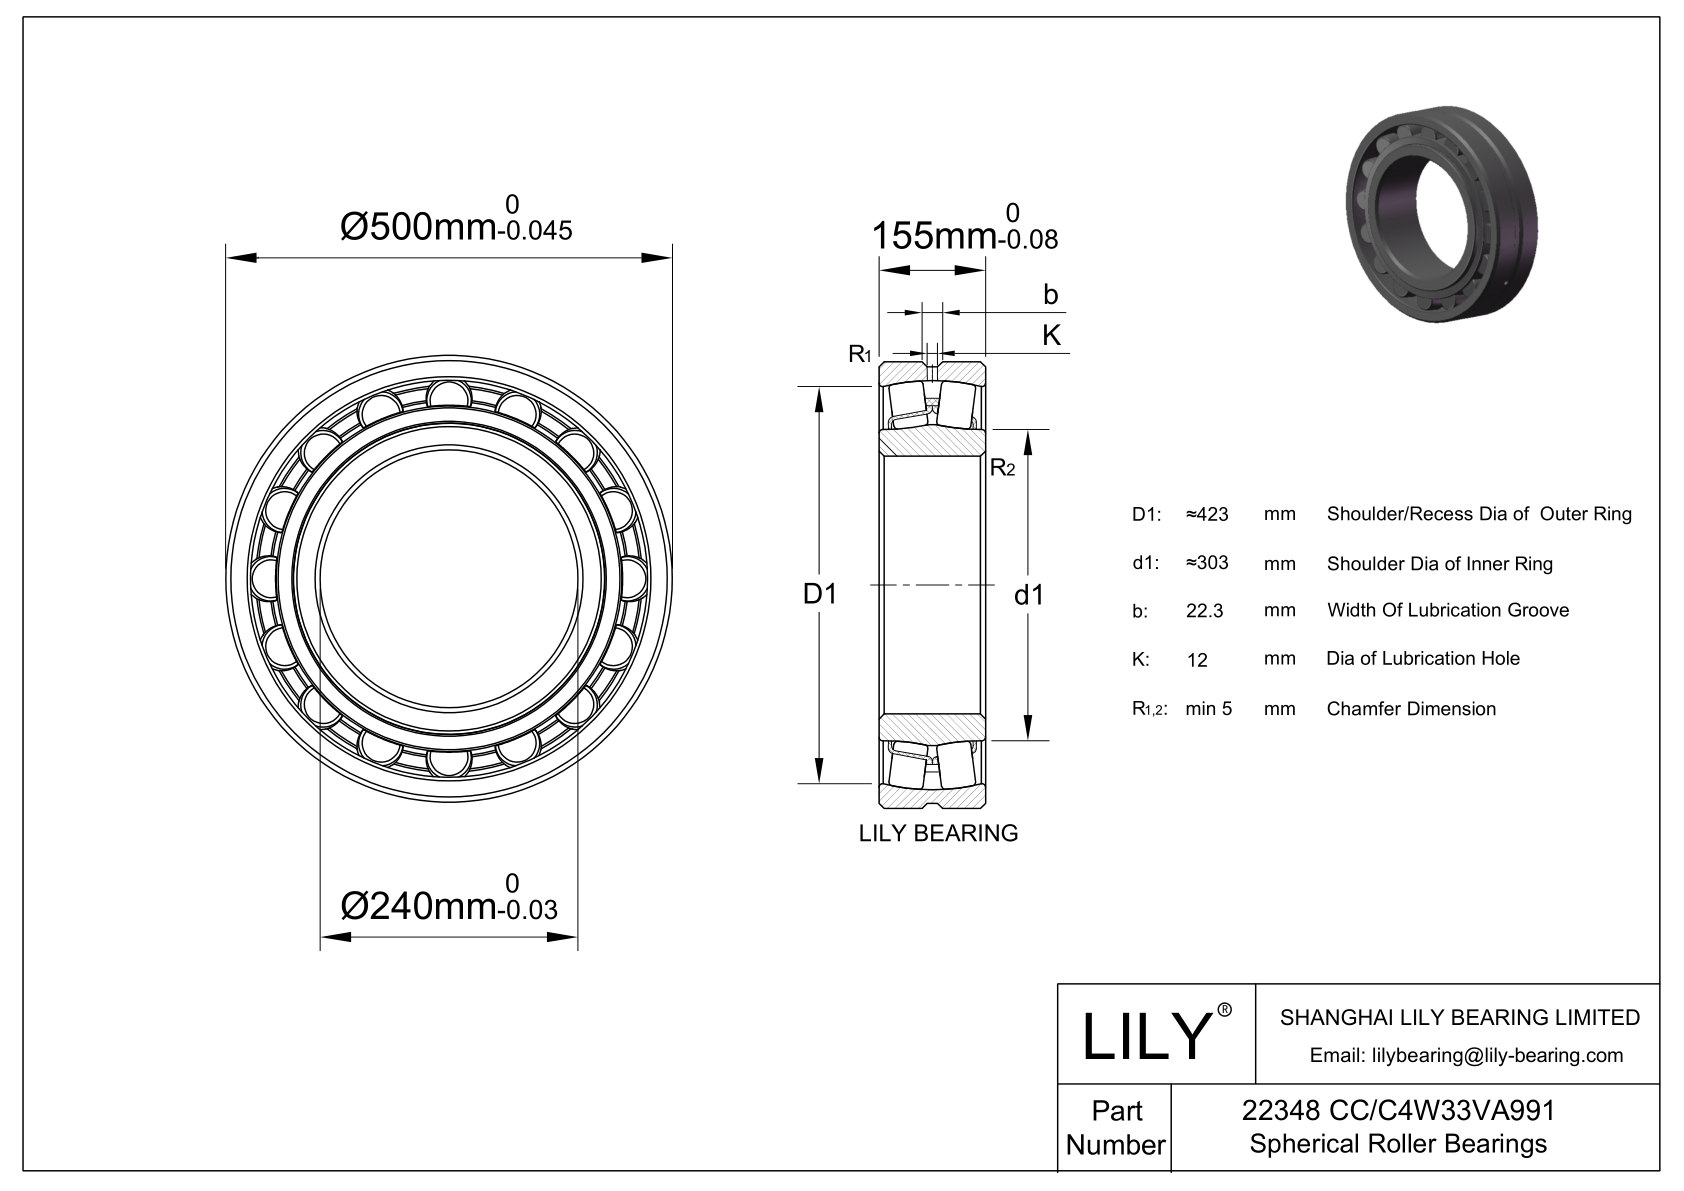 22348 CC/C4W33VA991 Double Row Spherical Roller Bearing cad drawing